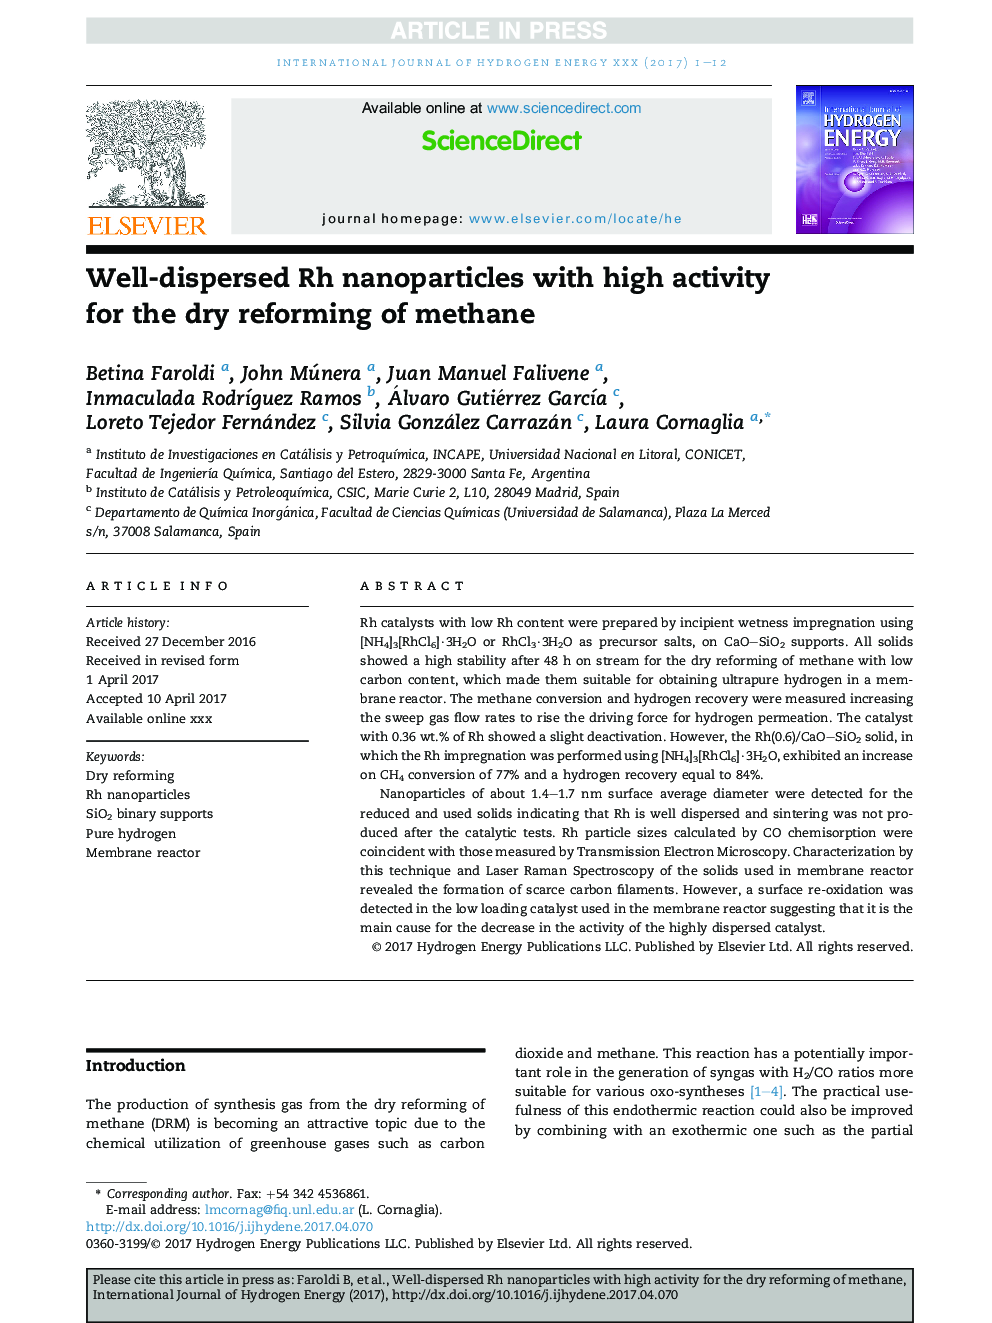 Well-dispersed Rh nanoparticles with high activity for the dry reforming of methane